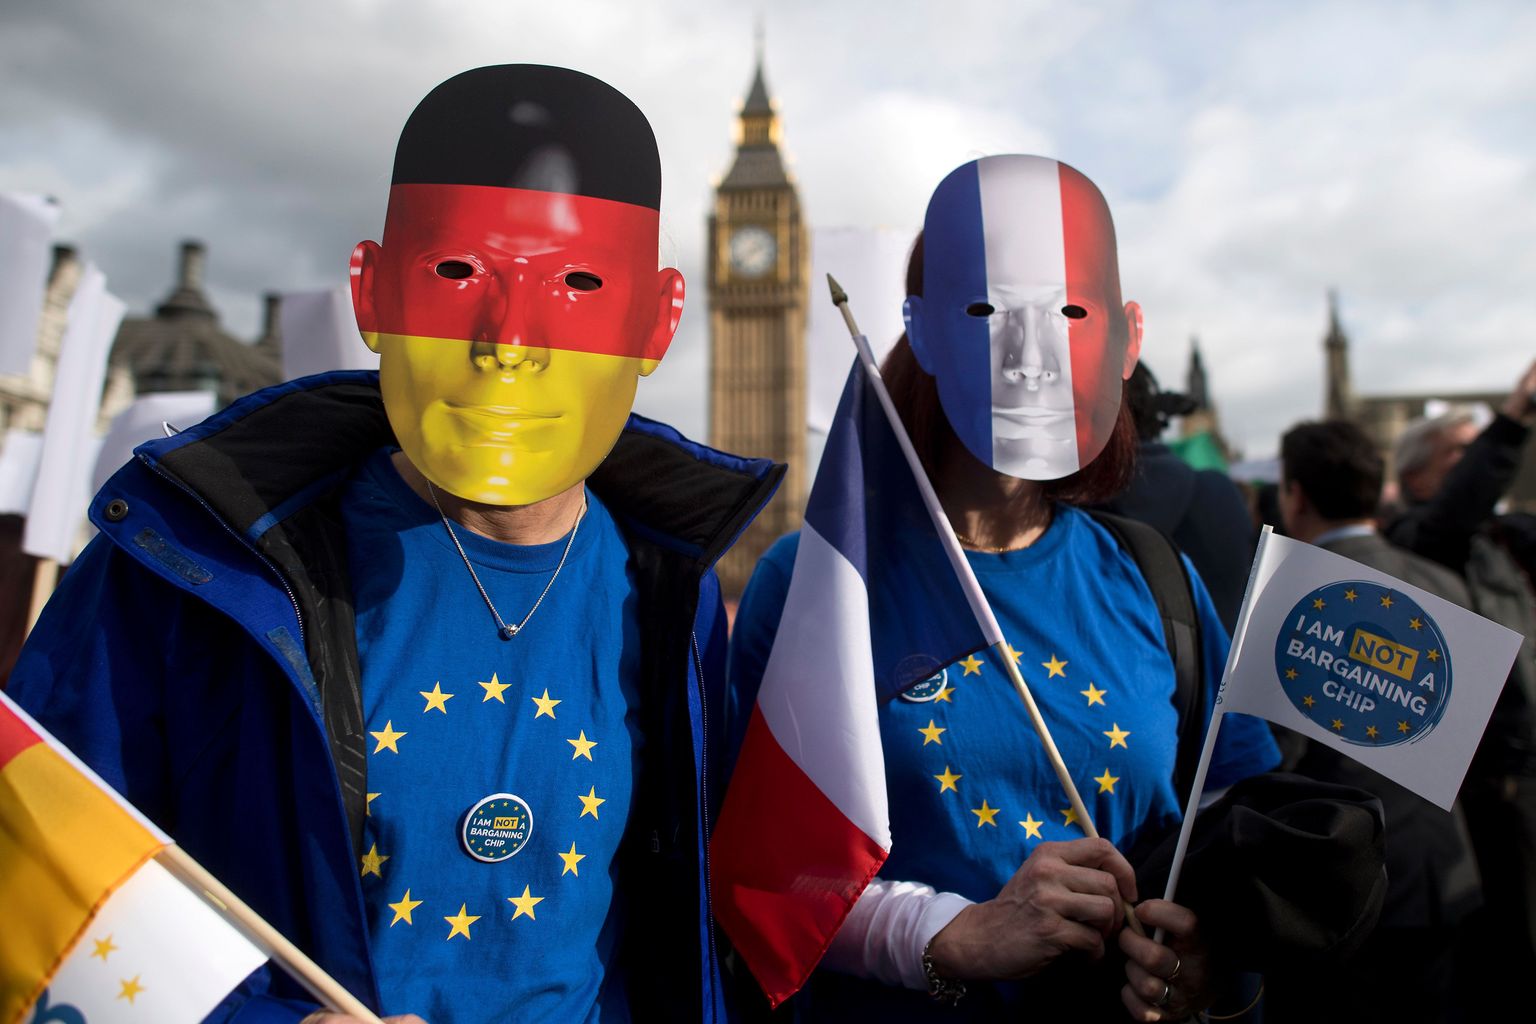 TOPSHOT - Protesters wearing German and French flag face masks pose for a photograph during a "Flag Mob" demonstration in Parliament Square in central London on February 20, 2017, part of a national day of action in support of migrants in the UK. 
Under the banner